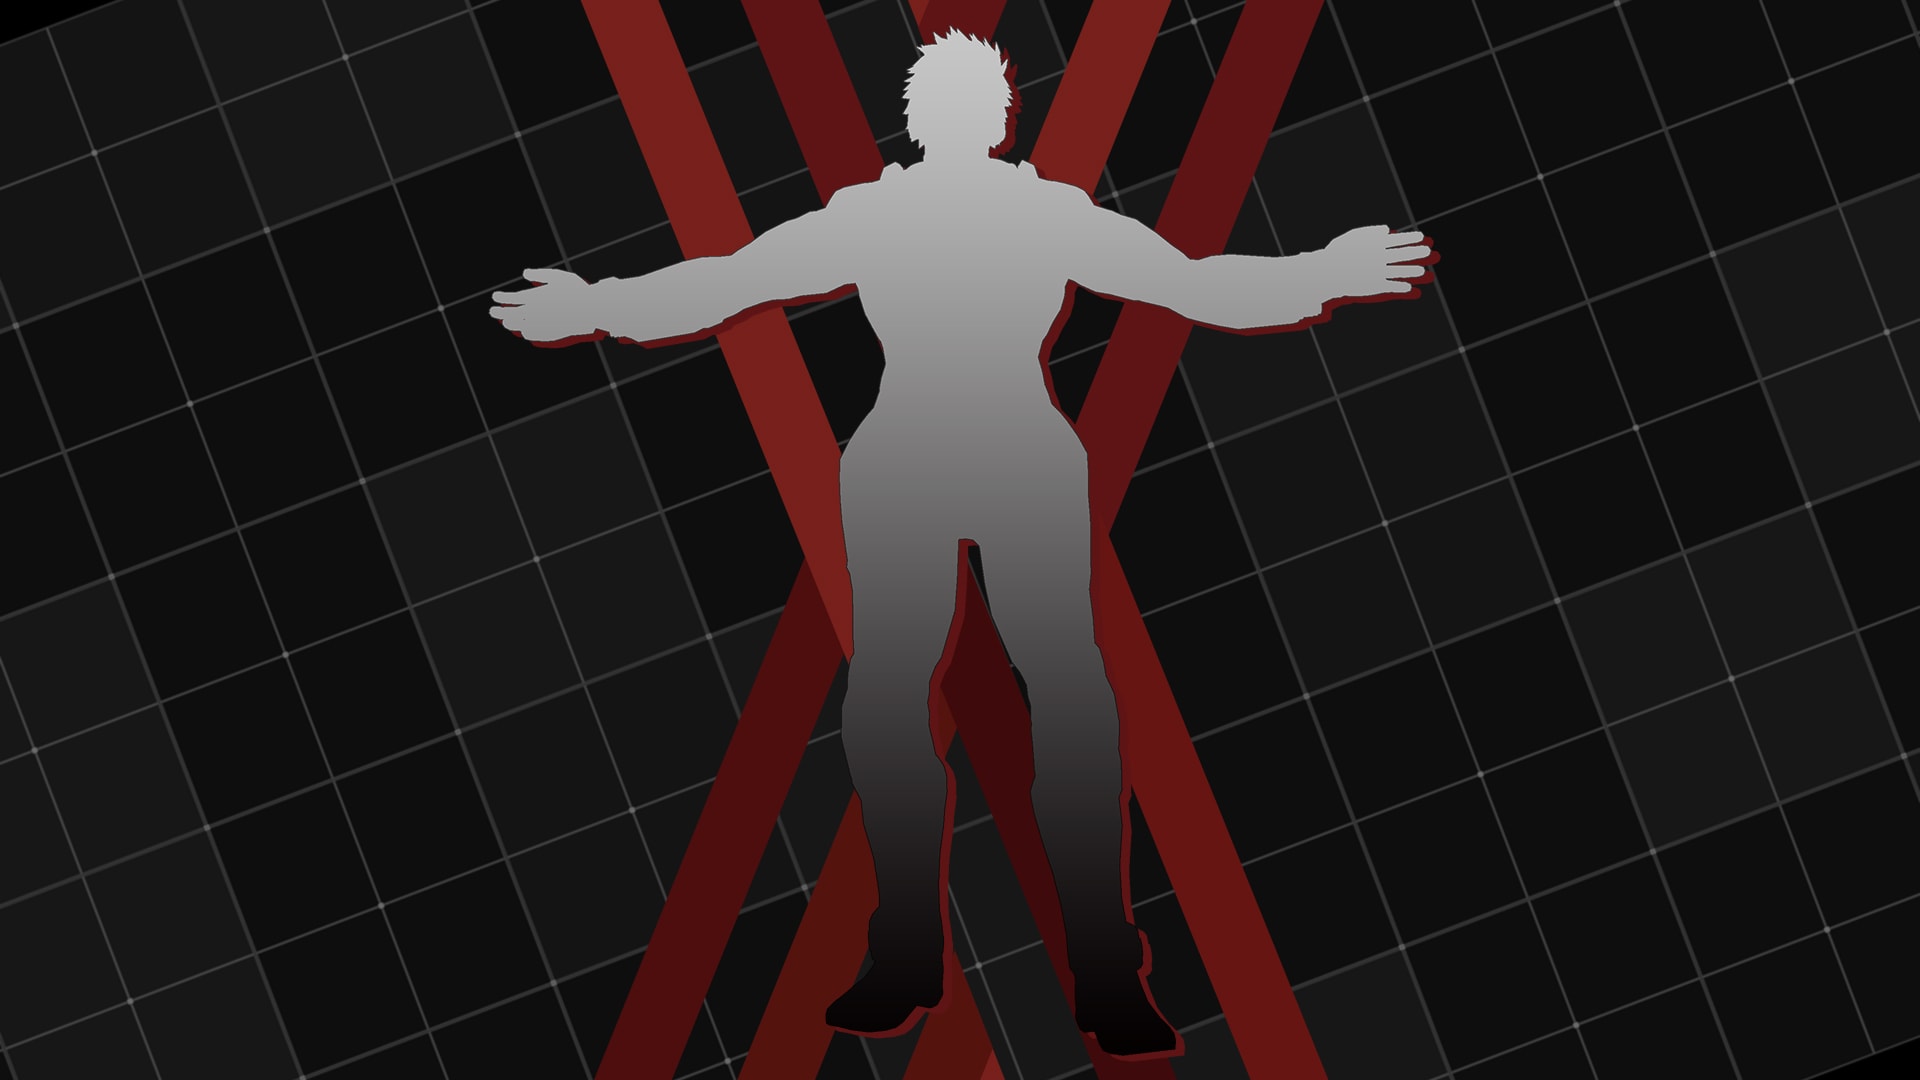 Outer Emote "Outstretched Arms"